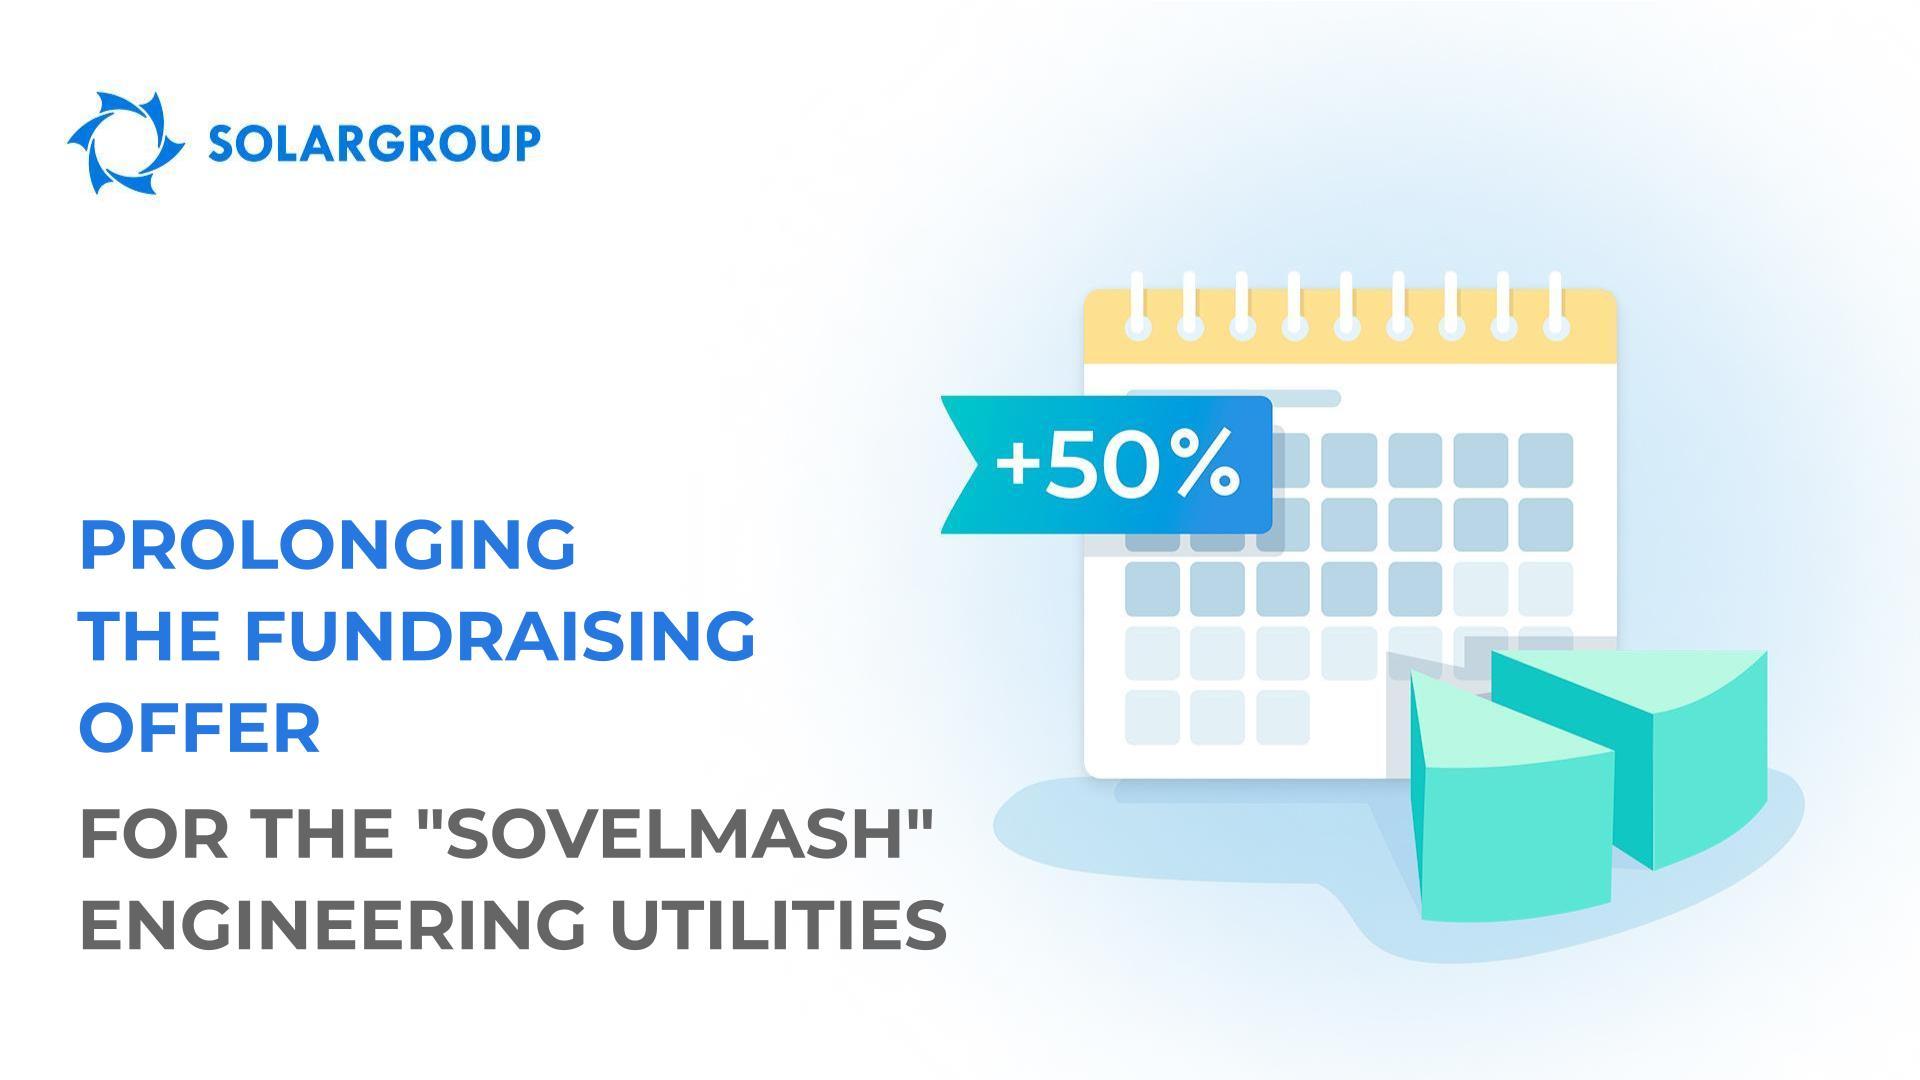 Prolonging the fundraising offer for the"Sovelmash" engineering utilities + expanding opportunities